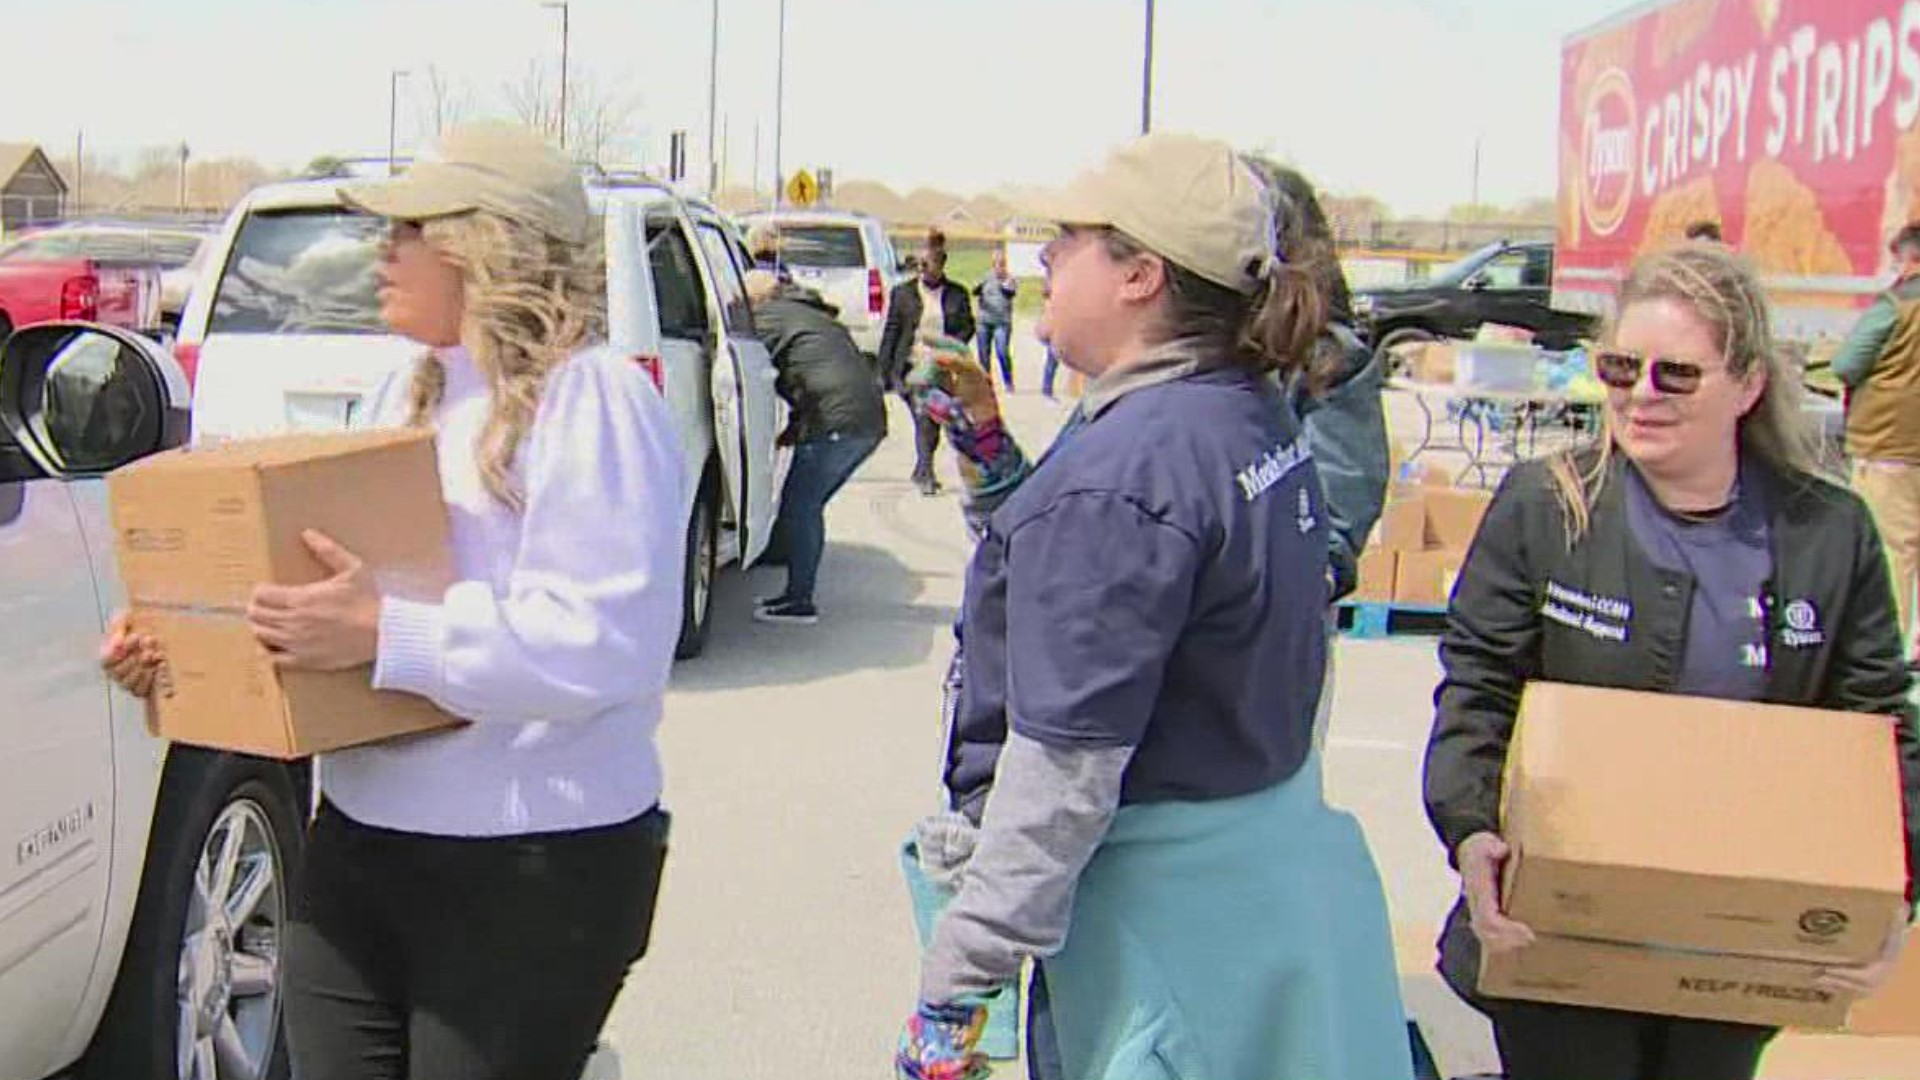 Tyson Foods held a free drive-thru, giving away 80,000 pounds of food to those impacted by the Springdale tornado.